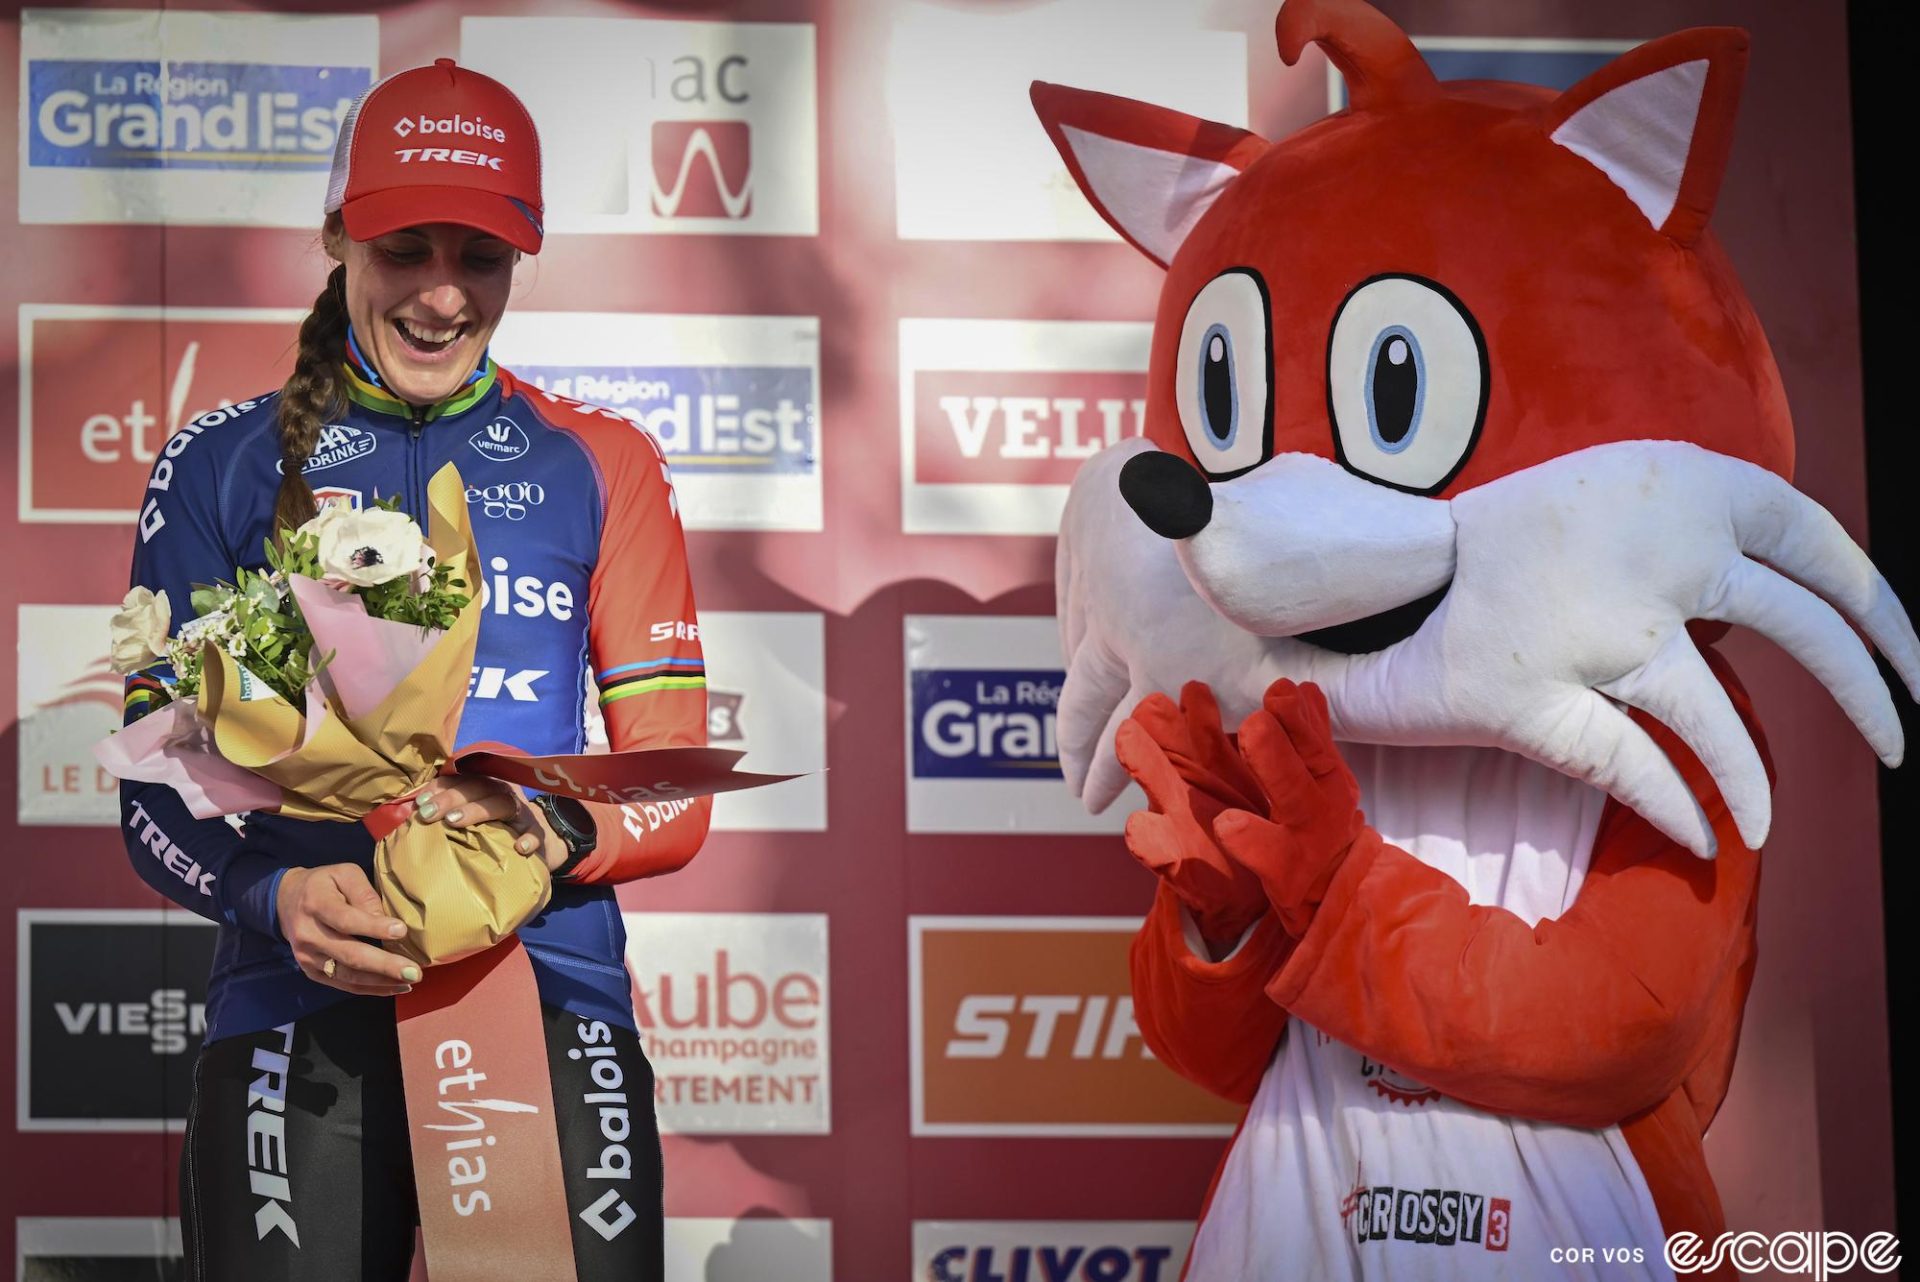 Lucinda Brand receives flowers on the podium from a person in a mascot costume that looks to be a large red fox with white face and belly.